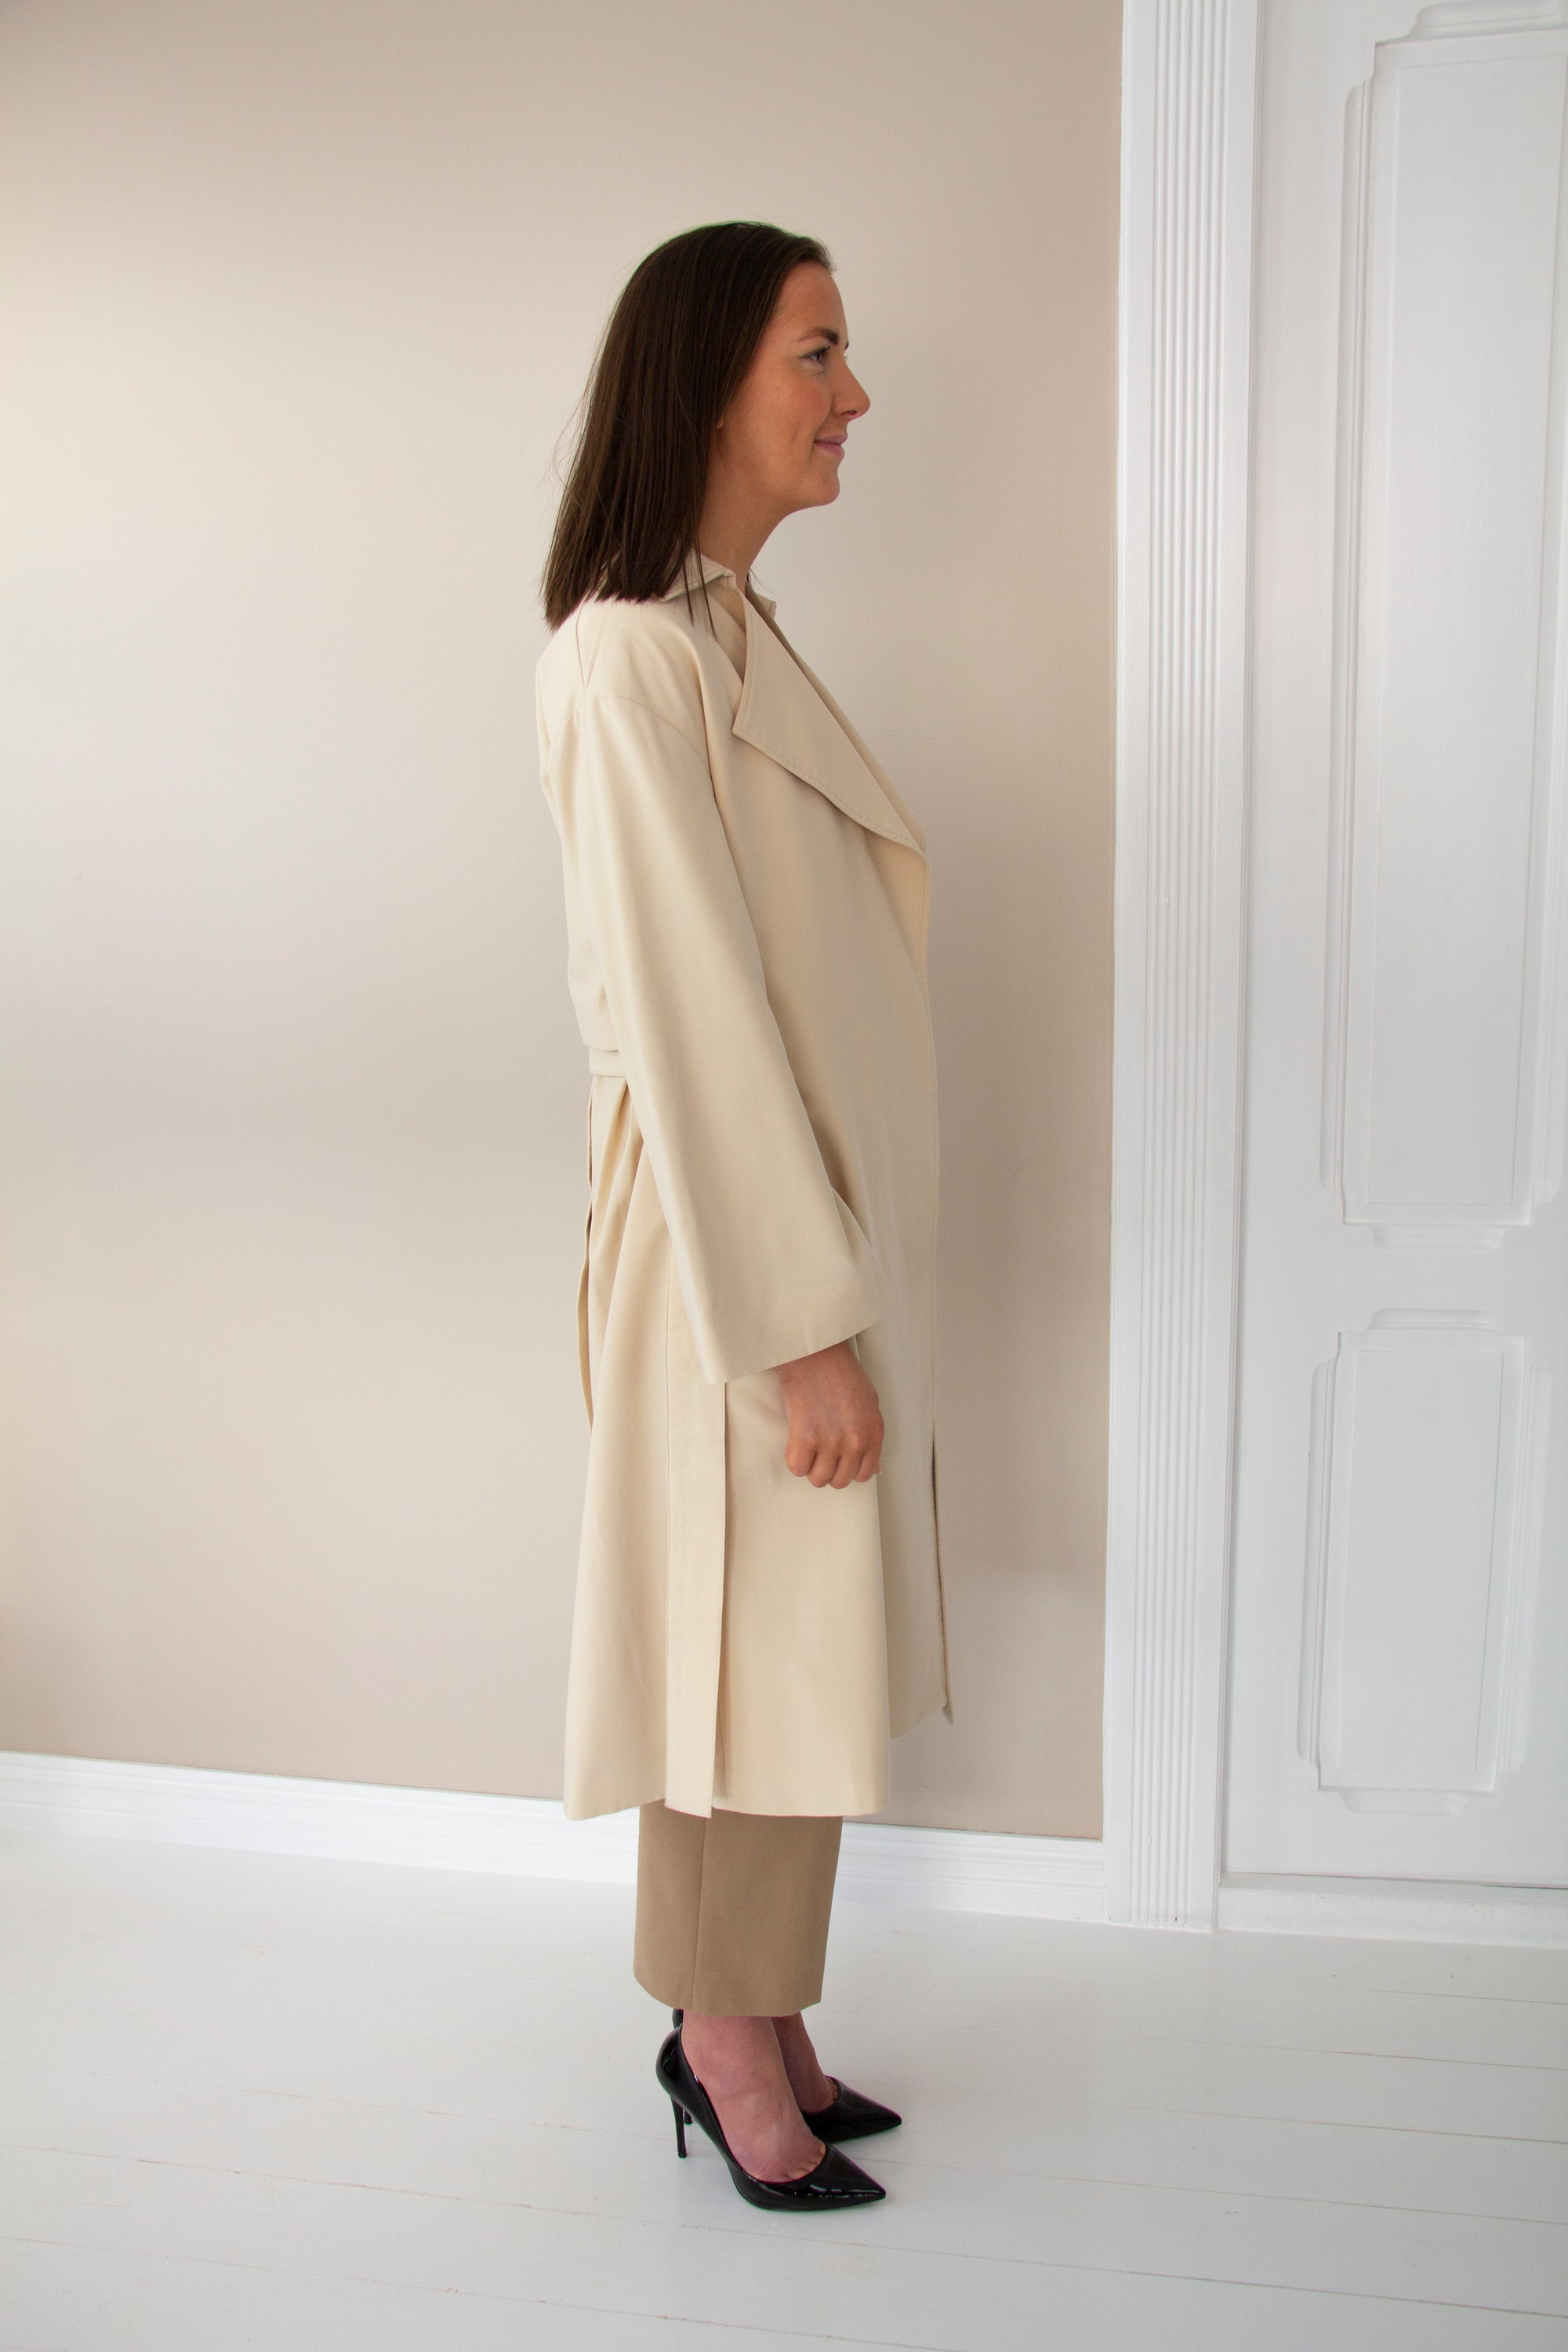 FRIEND OF AUDREY - Soft Trench Coat